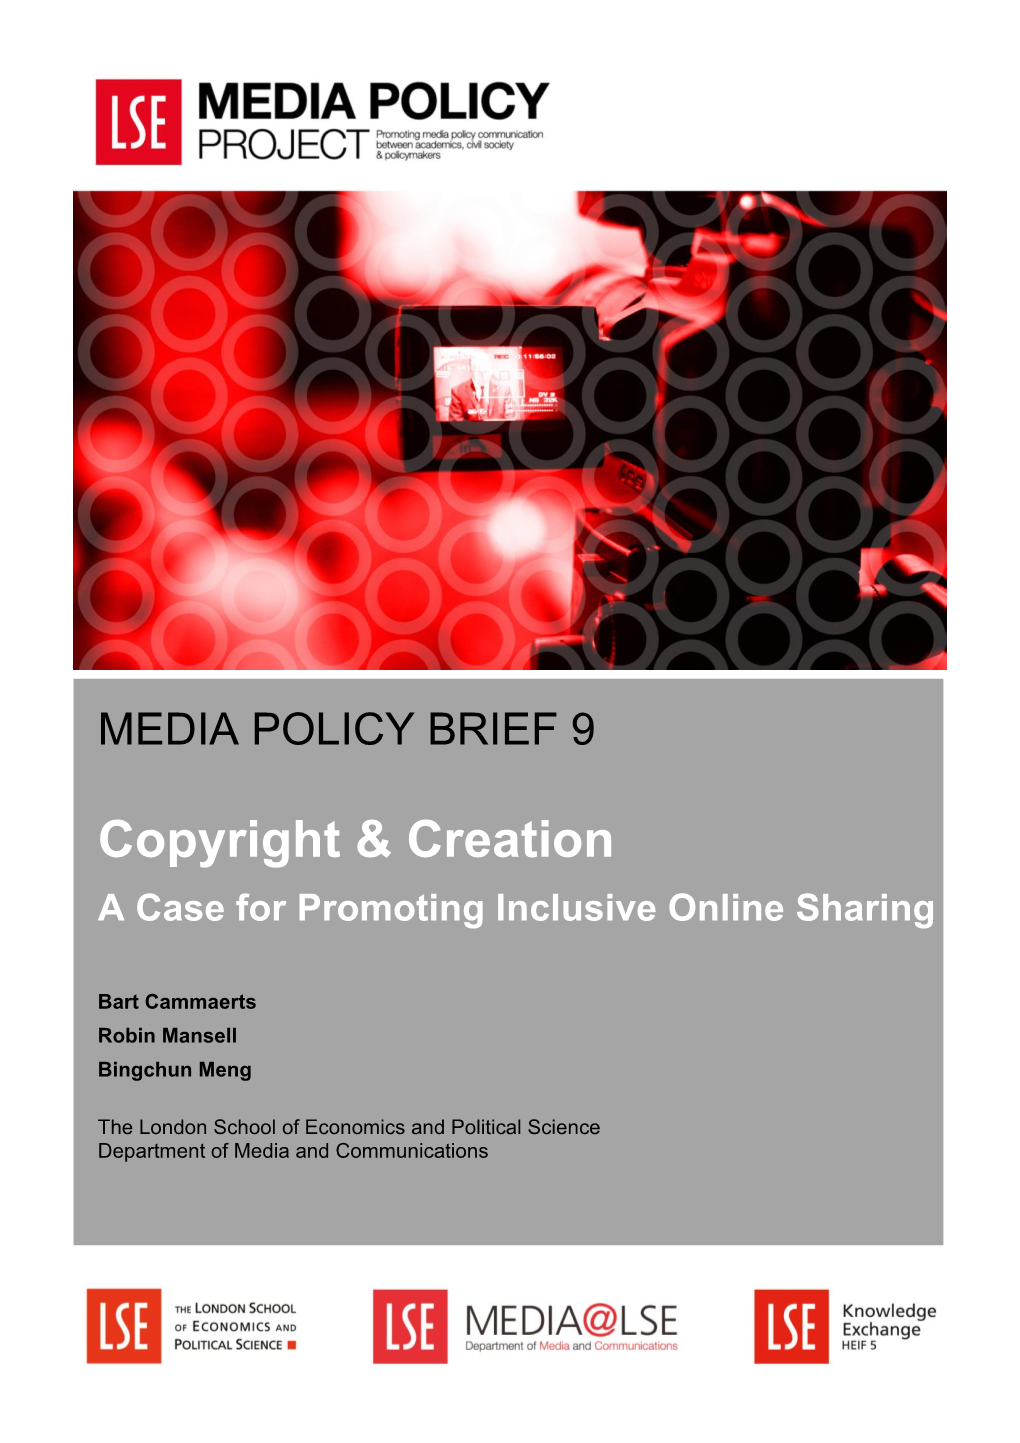 LSE MPP Policy Brief 9 Copyright and Creation